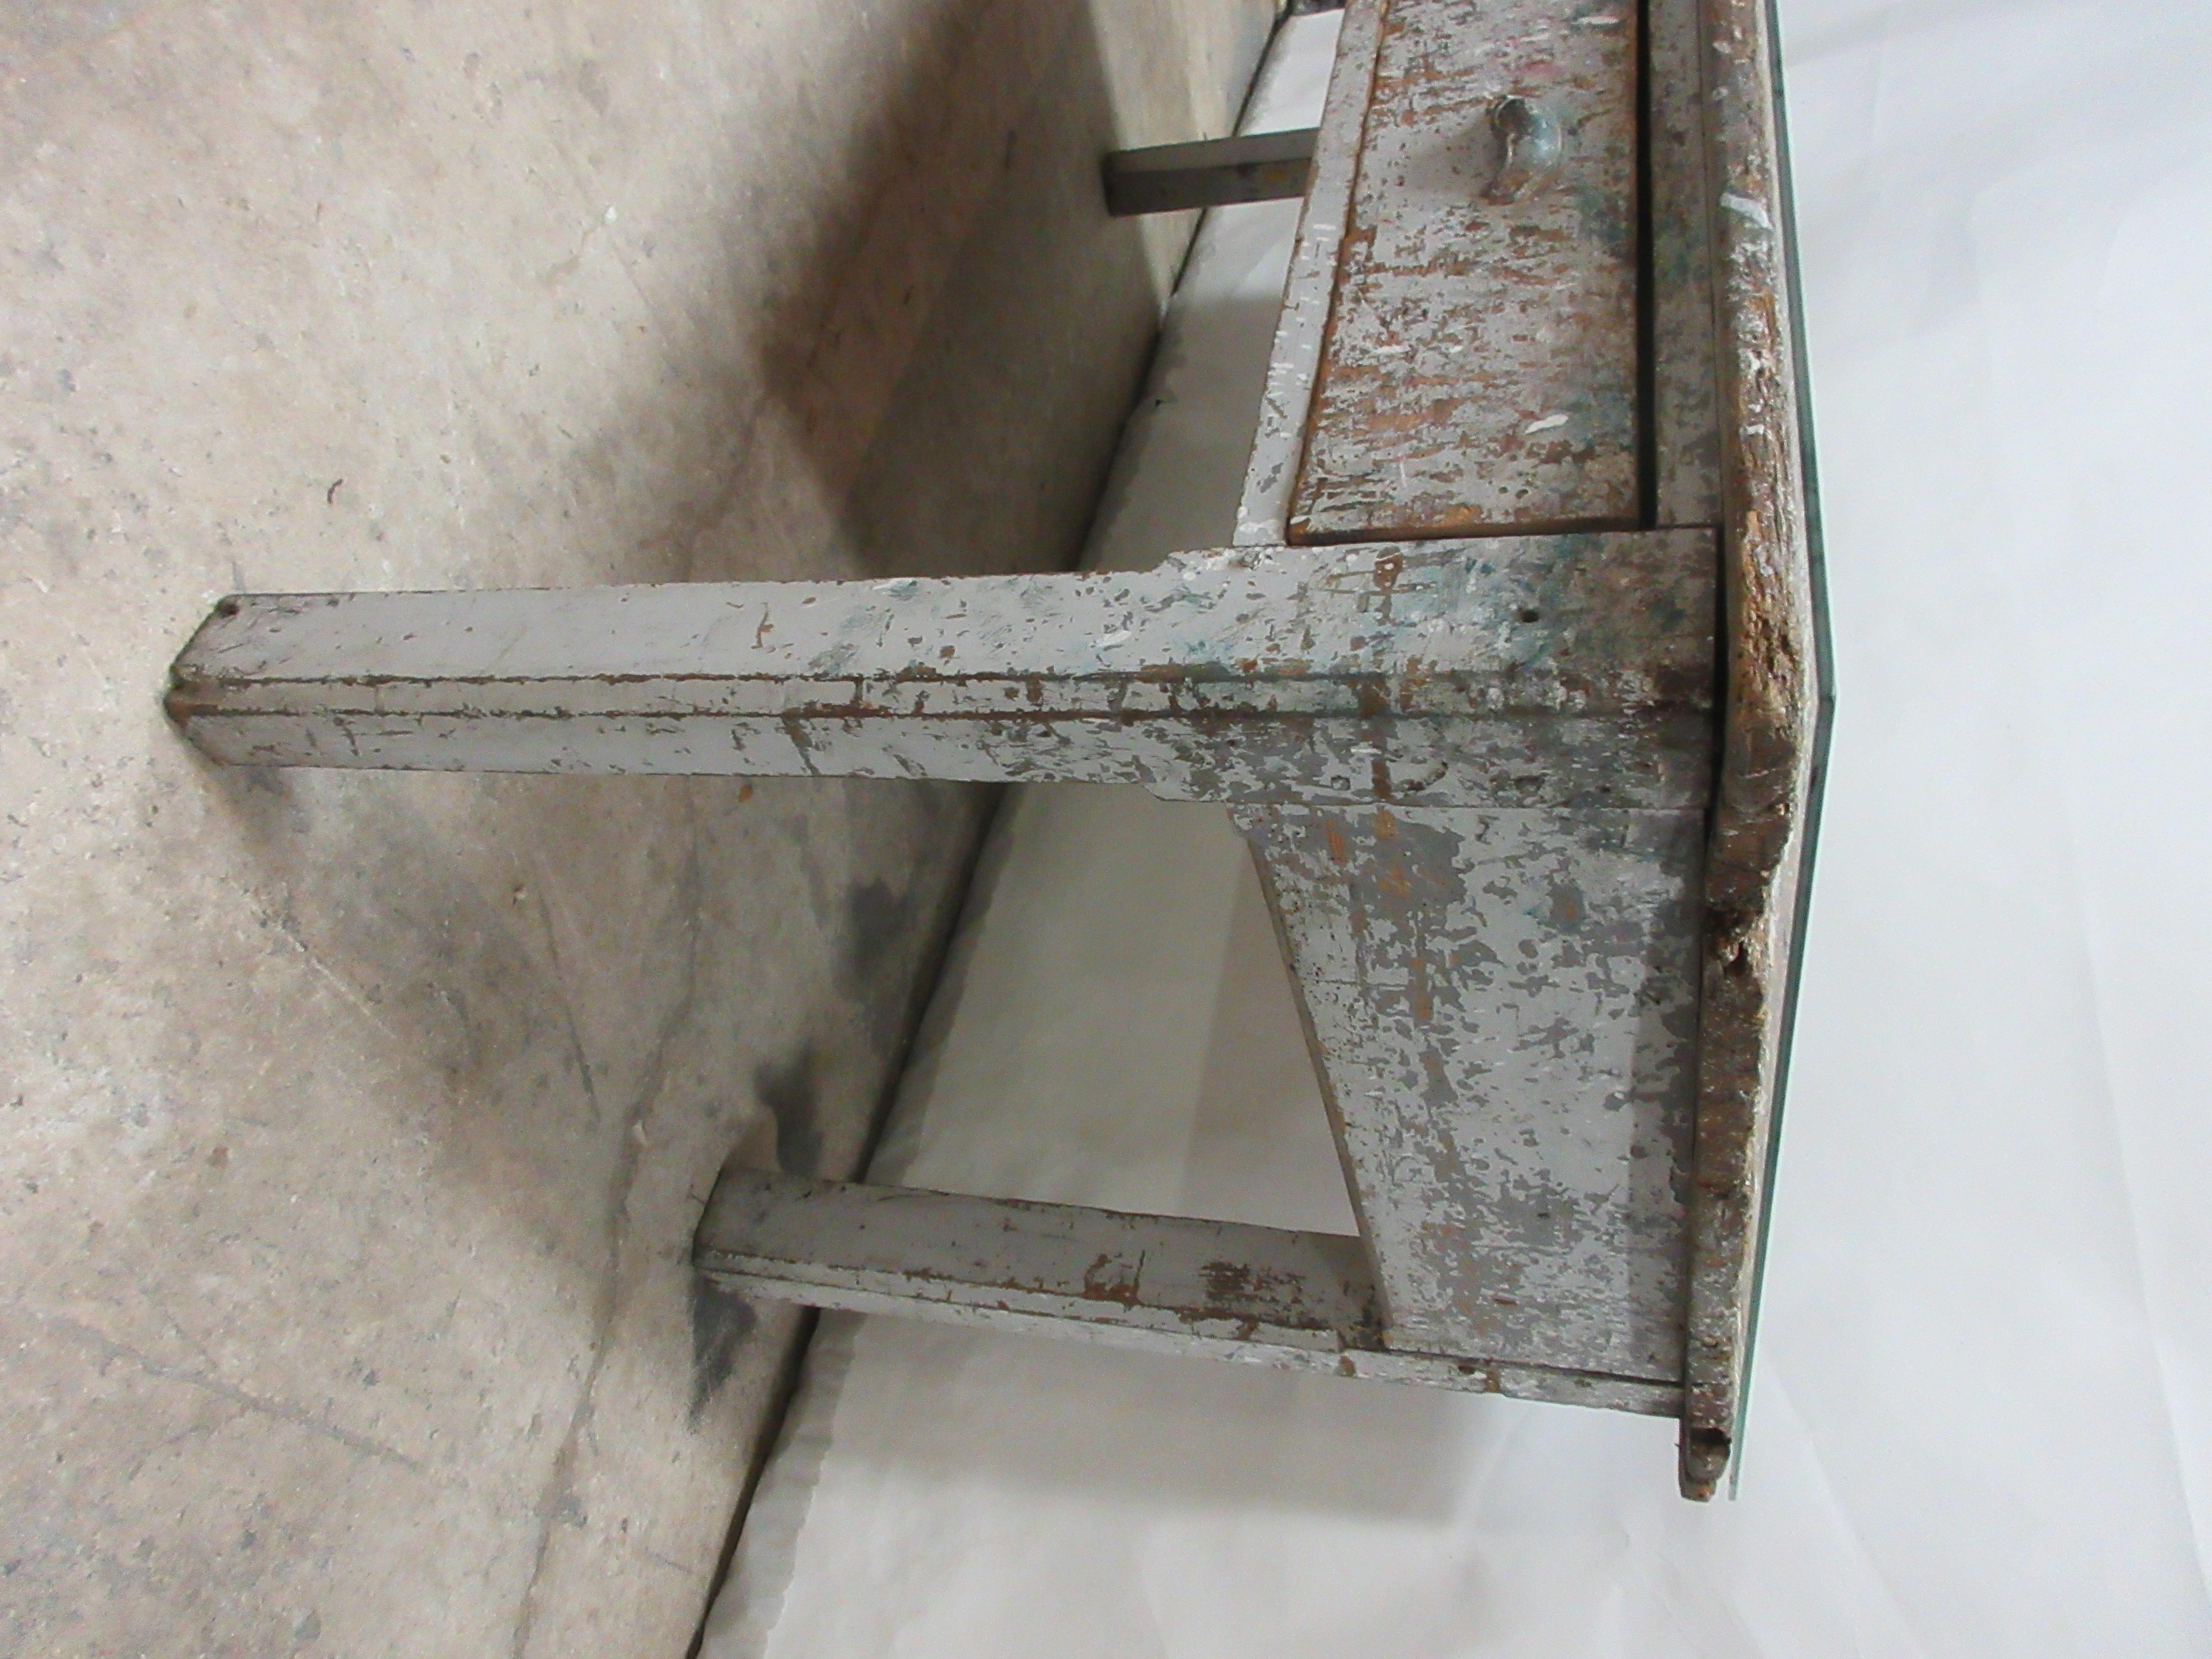 Late 19th Century Paint Shop Work Table